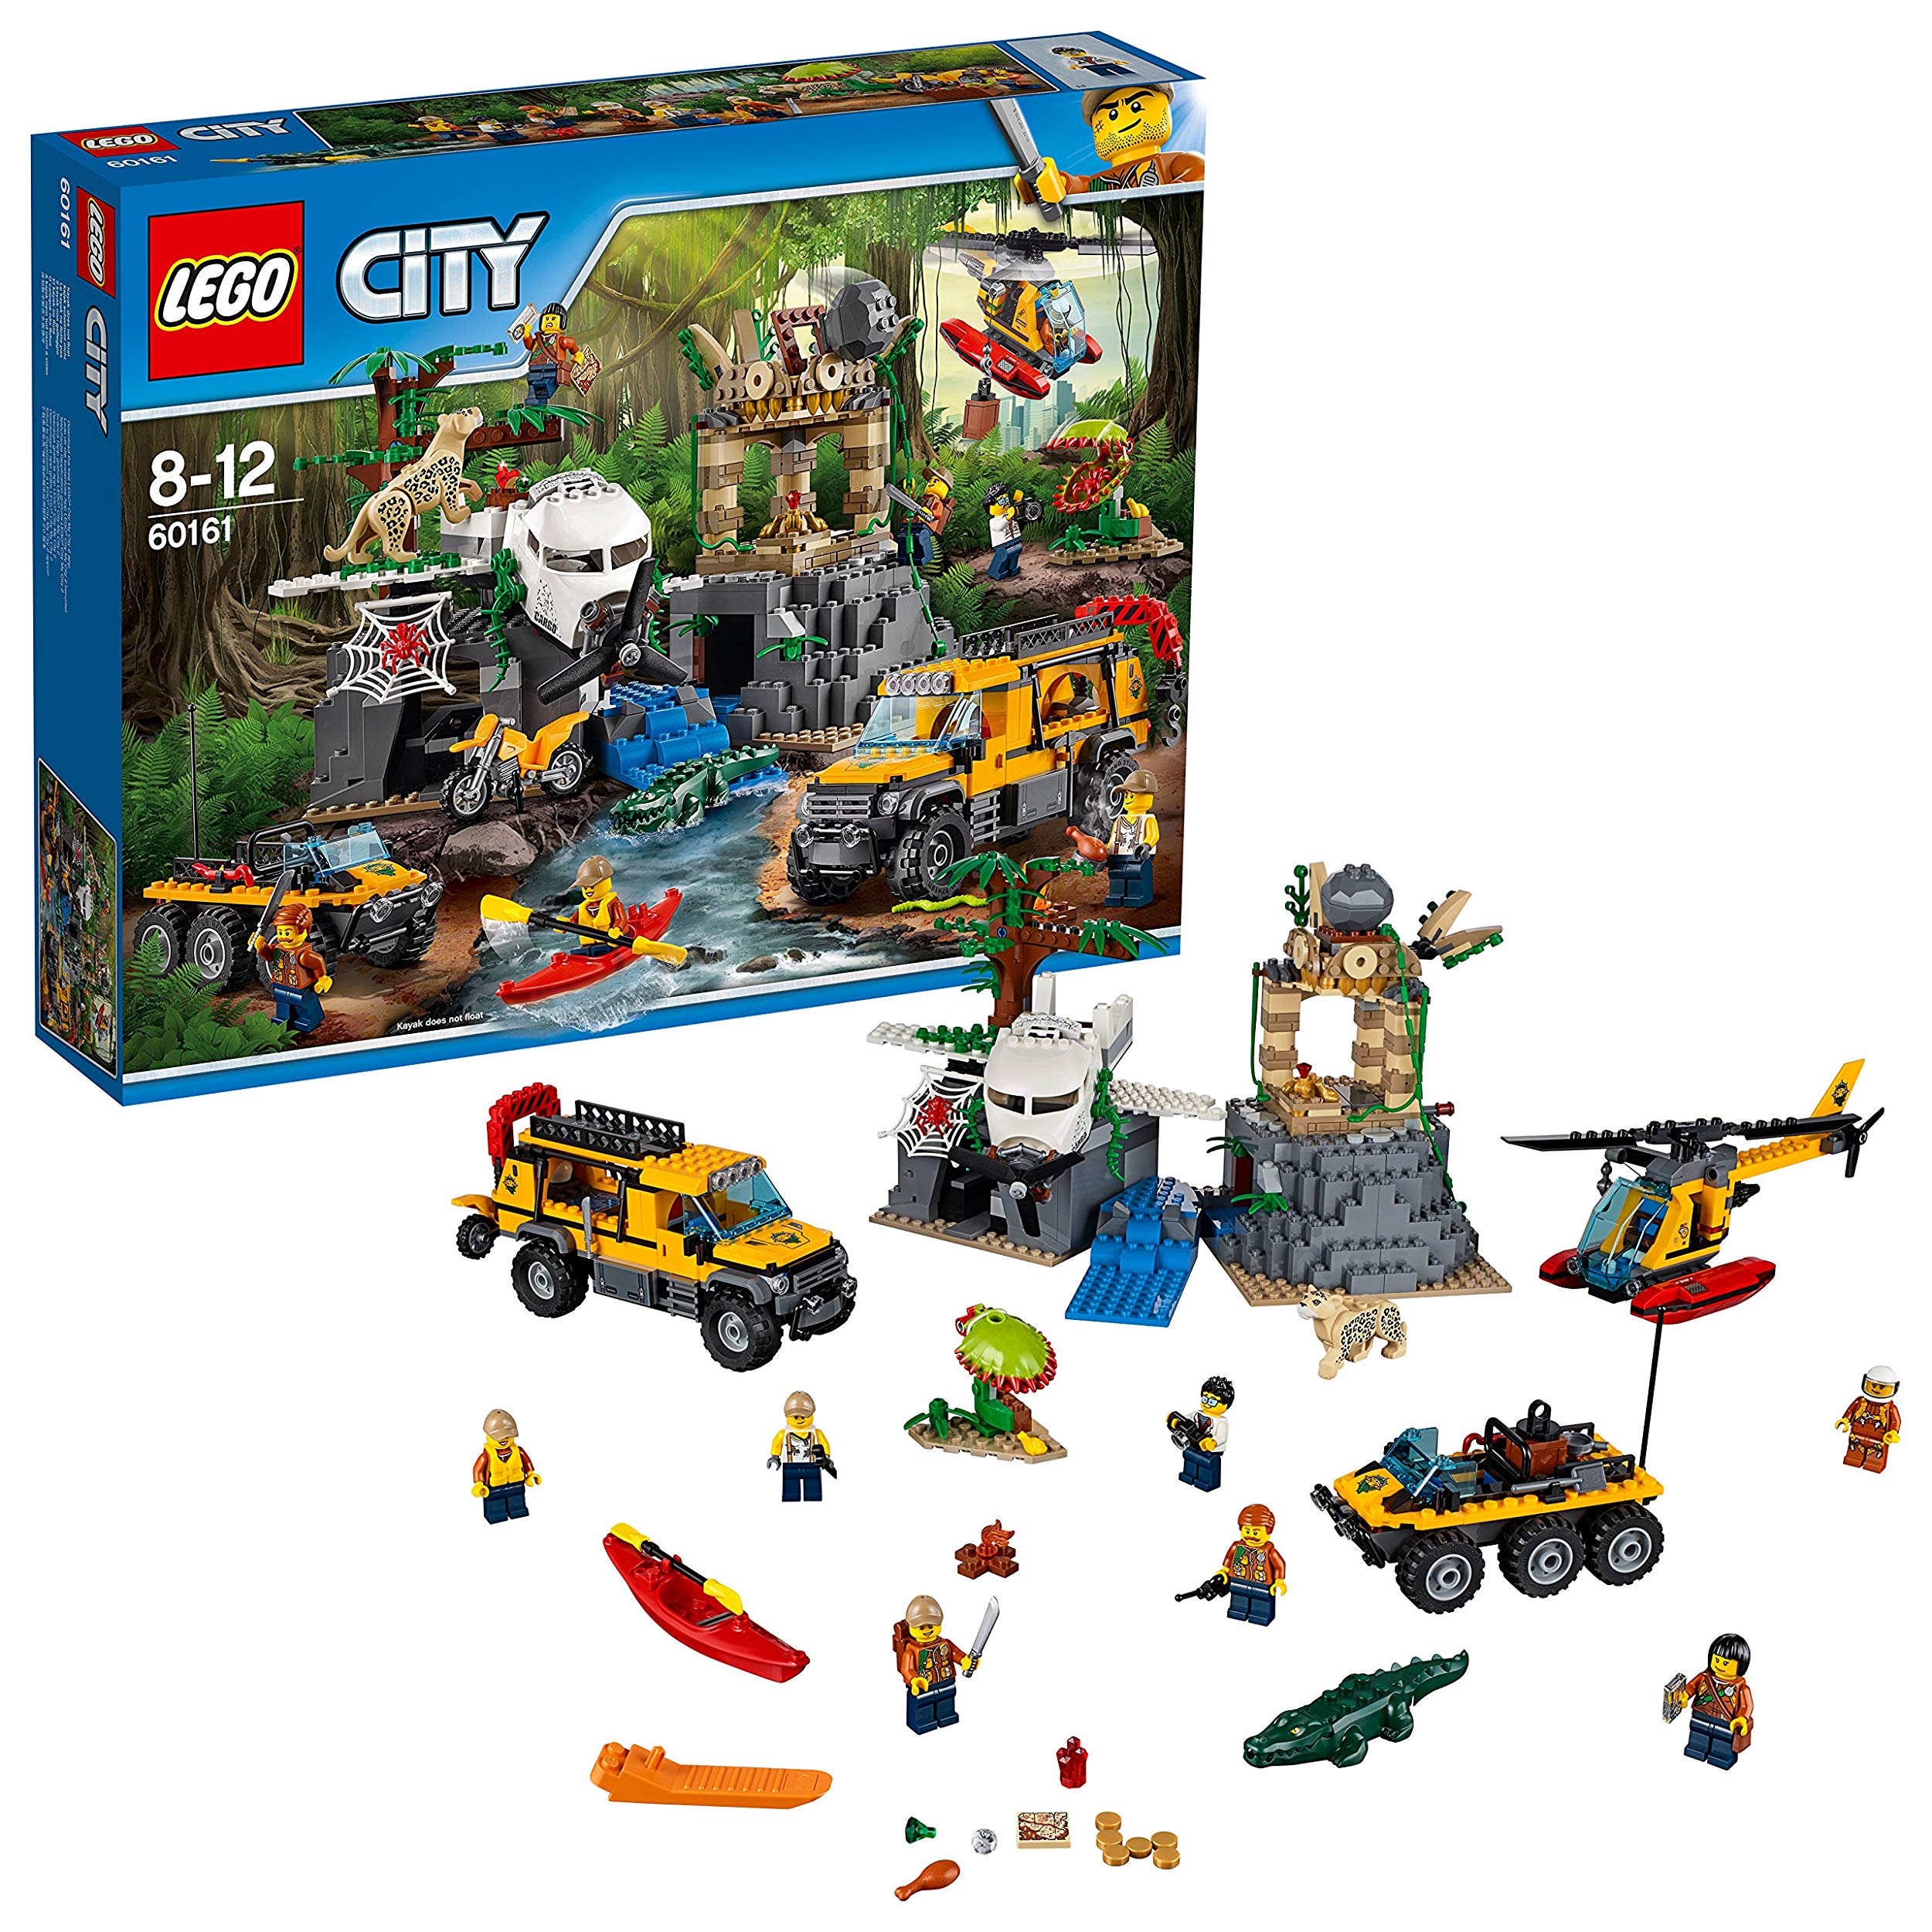 Lego City Jungle Research Station